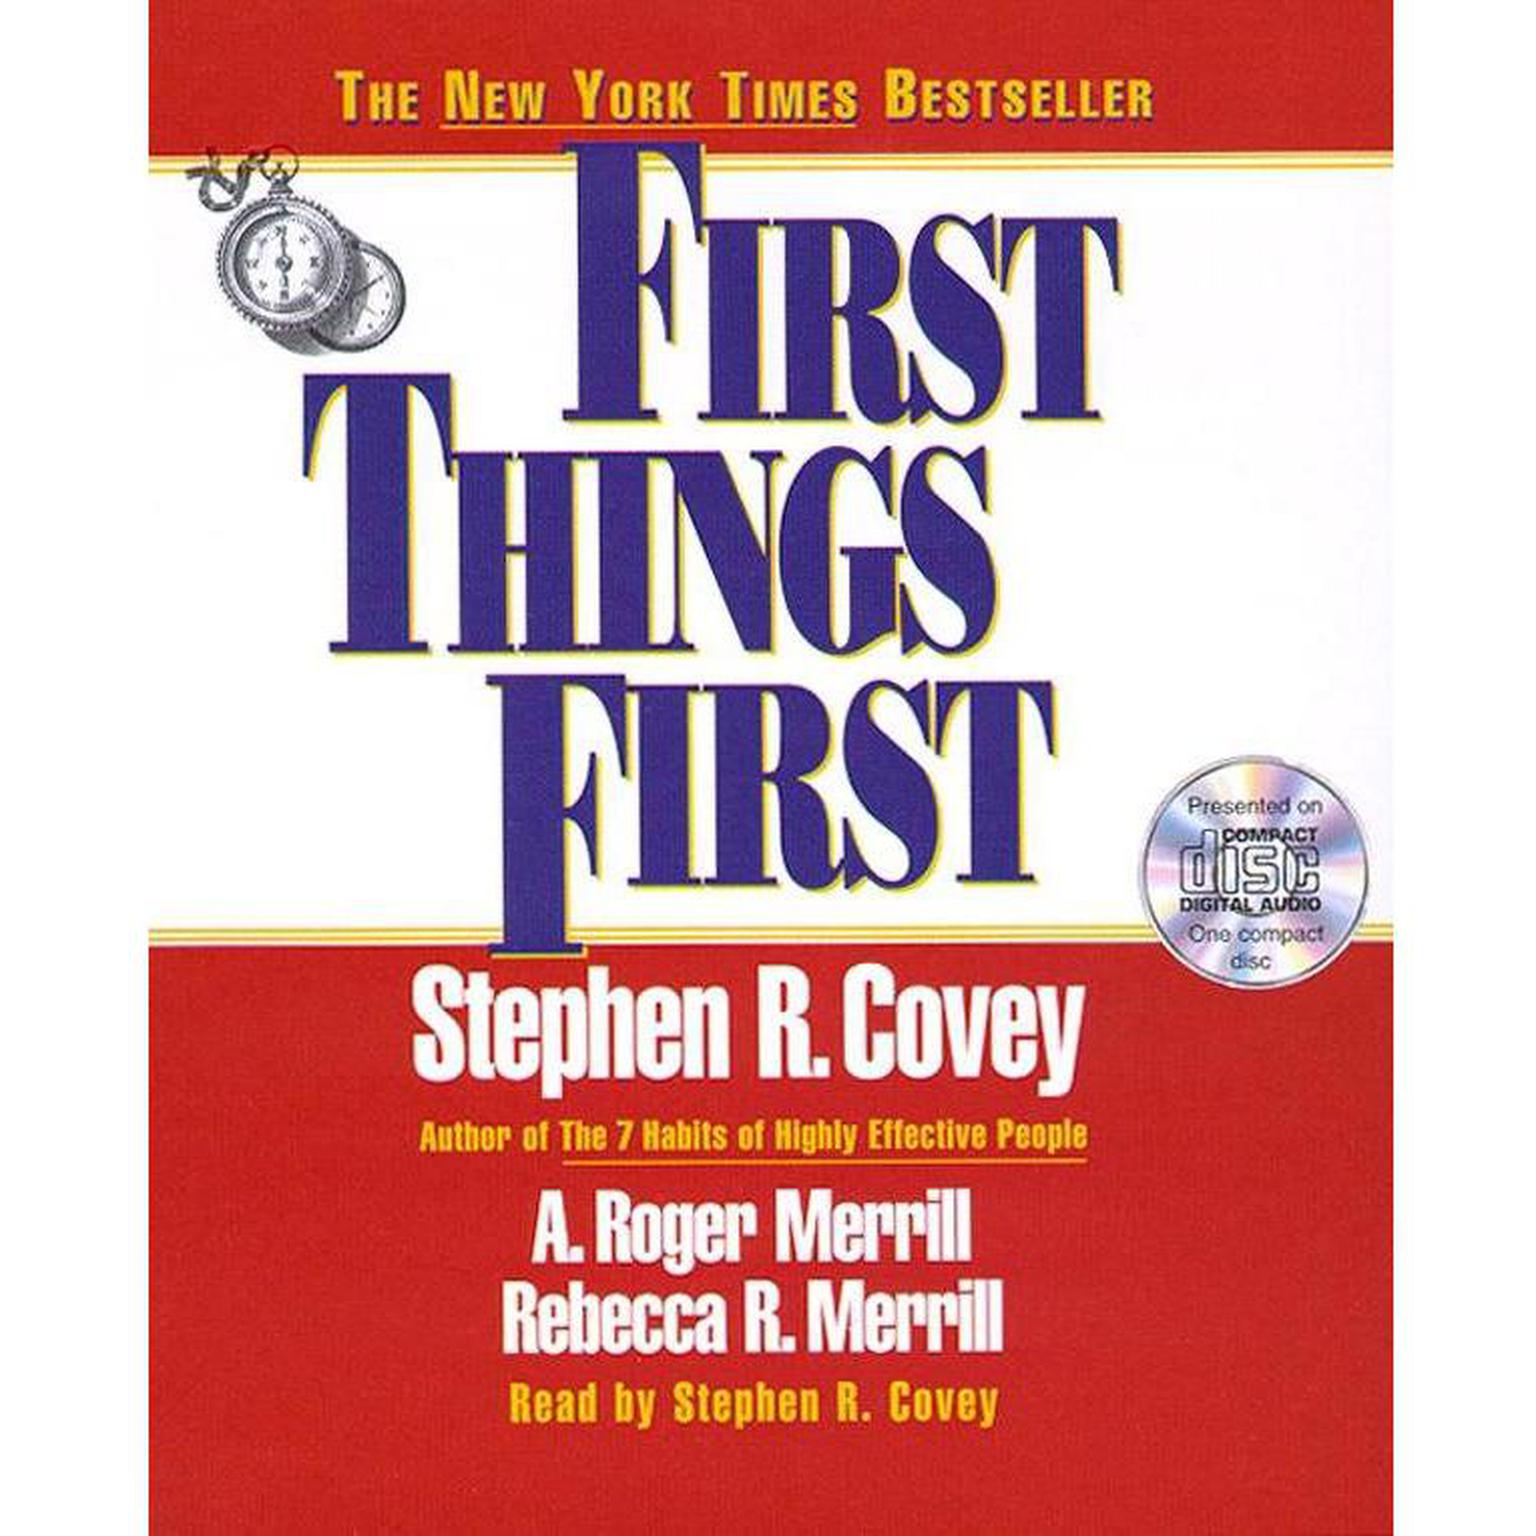 First Things First (Abridged) Audiobook, by Stephen R. Covey